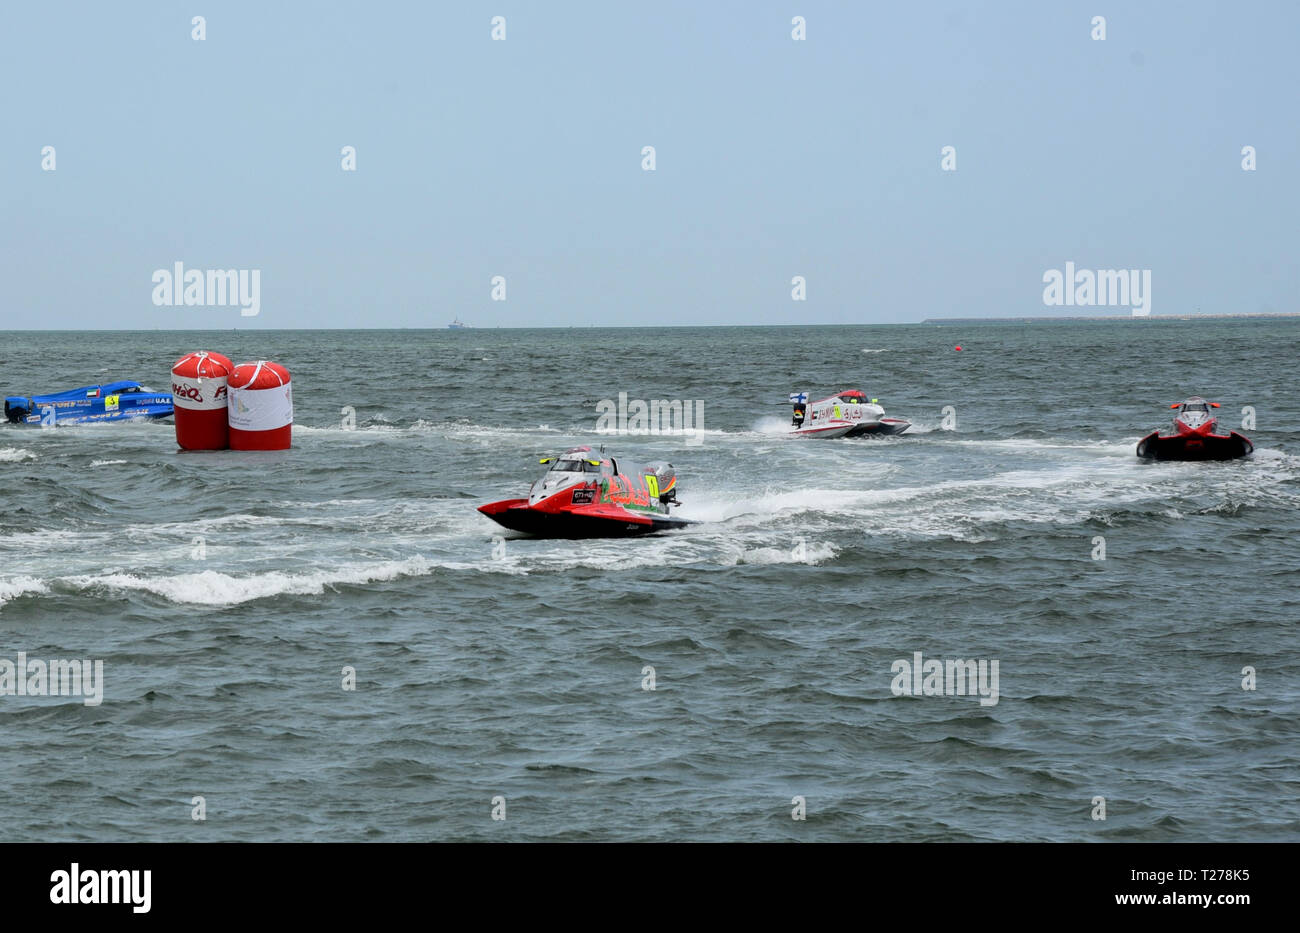 Dammam, Saudi Arabia. 30th Mar, 2019. Powerboats give a brief performance to the audience in Dammam, Saudi Arabia, March 30, 2019. Due to the strong winds and rough seas, officials announced on Saturday the cancellation of the opening round of the UIM Formula 1 World Powerboat Championship (F1H2O) in Dammam. Credit: Tu Yifan/Xinhua/Alamy Live News Stock Photo